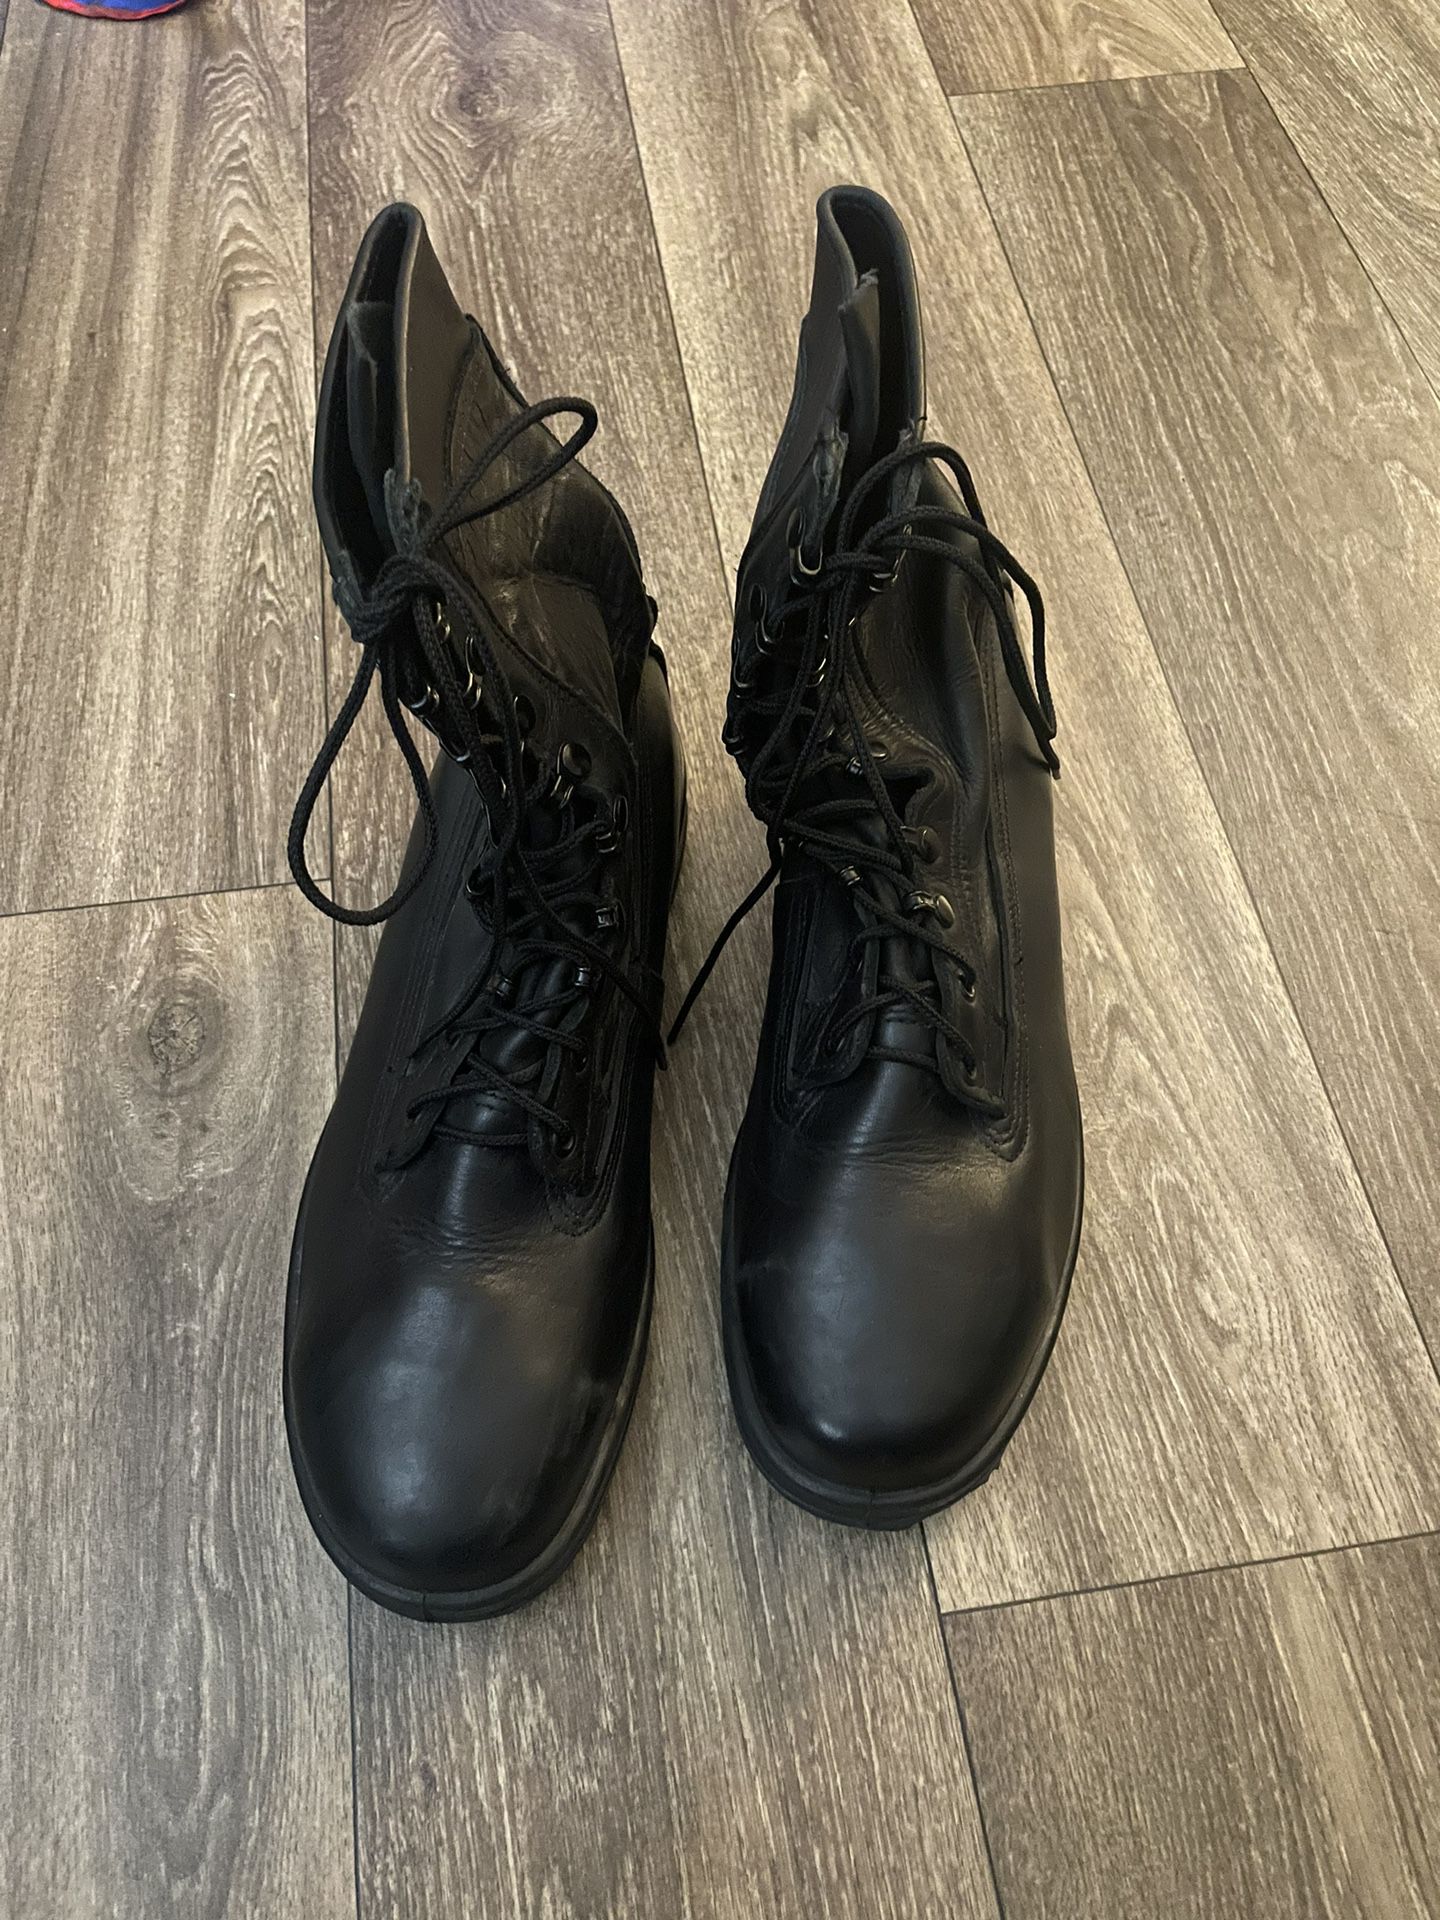 Military Boots 10.5 M